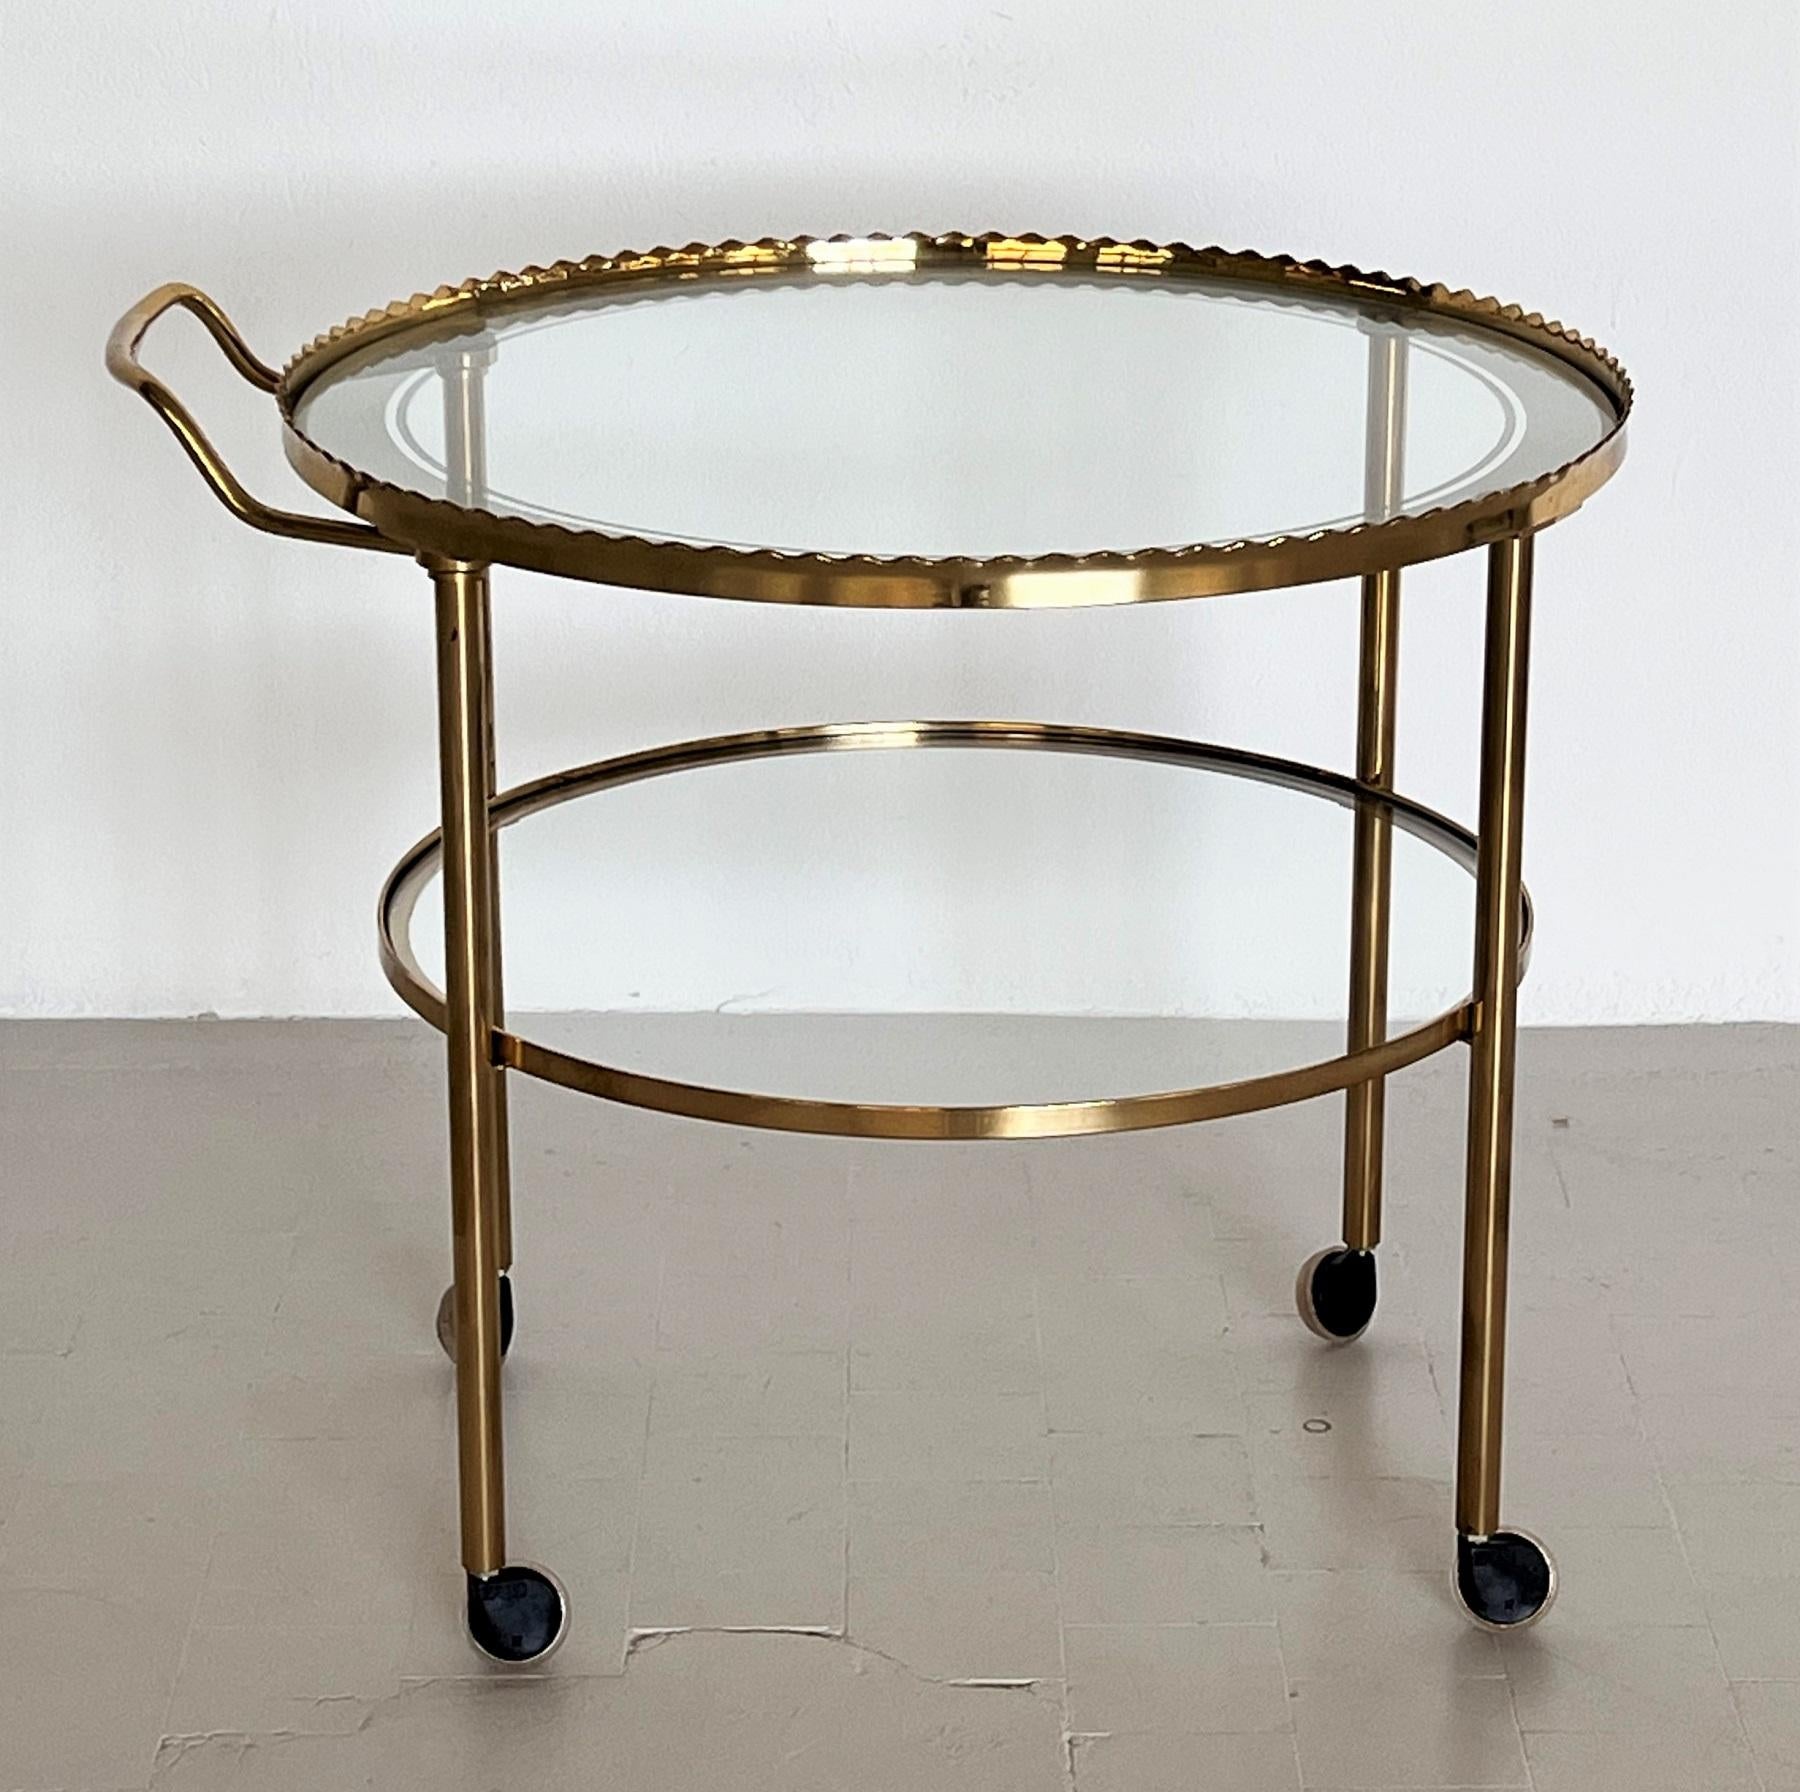 Beautiful elegant serving trolley or bar cart from the 1960s with four wheels.
The beauty of this trolley is the form of the upper brass frame.
The two trays are made of glass; the upper glass plate has a clear creamy white stripe on the outer